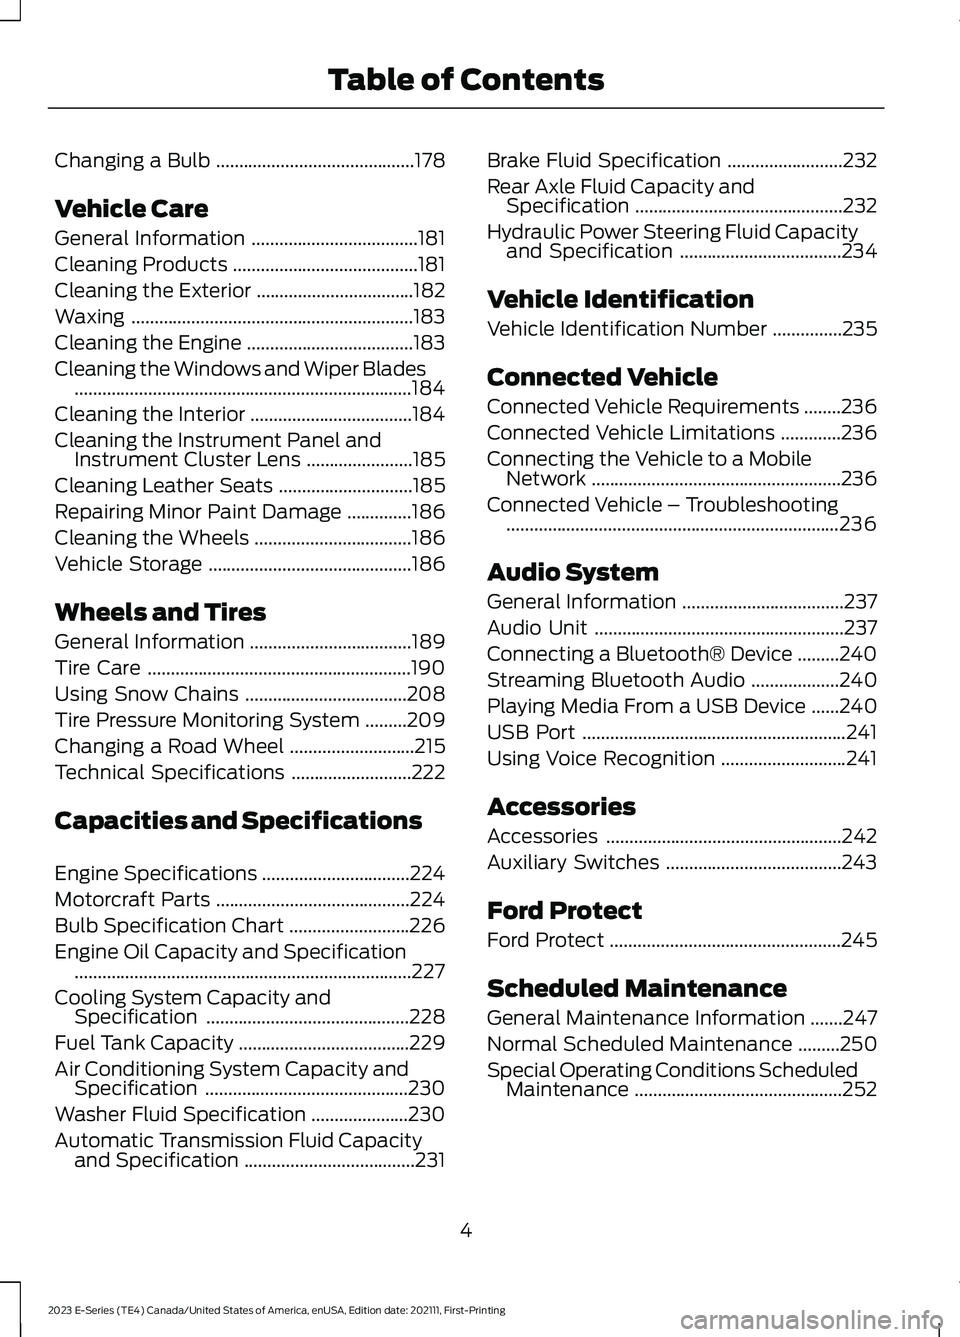 FORD E SERIES 2023  Owners Manual Changing a Bulb...........................................178
Vehicle Care
General Information....................................181
Cleaning Products........................................181
Clean